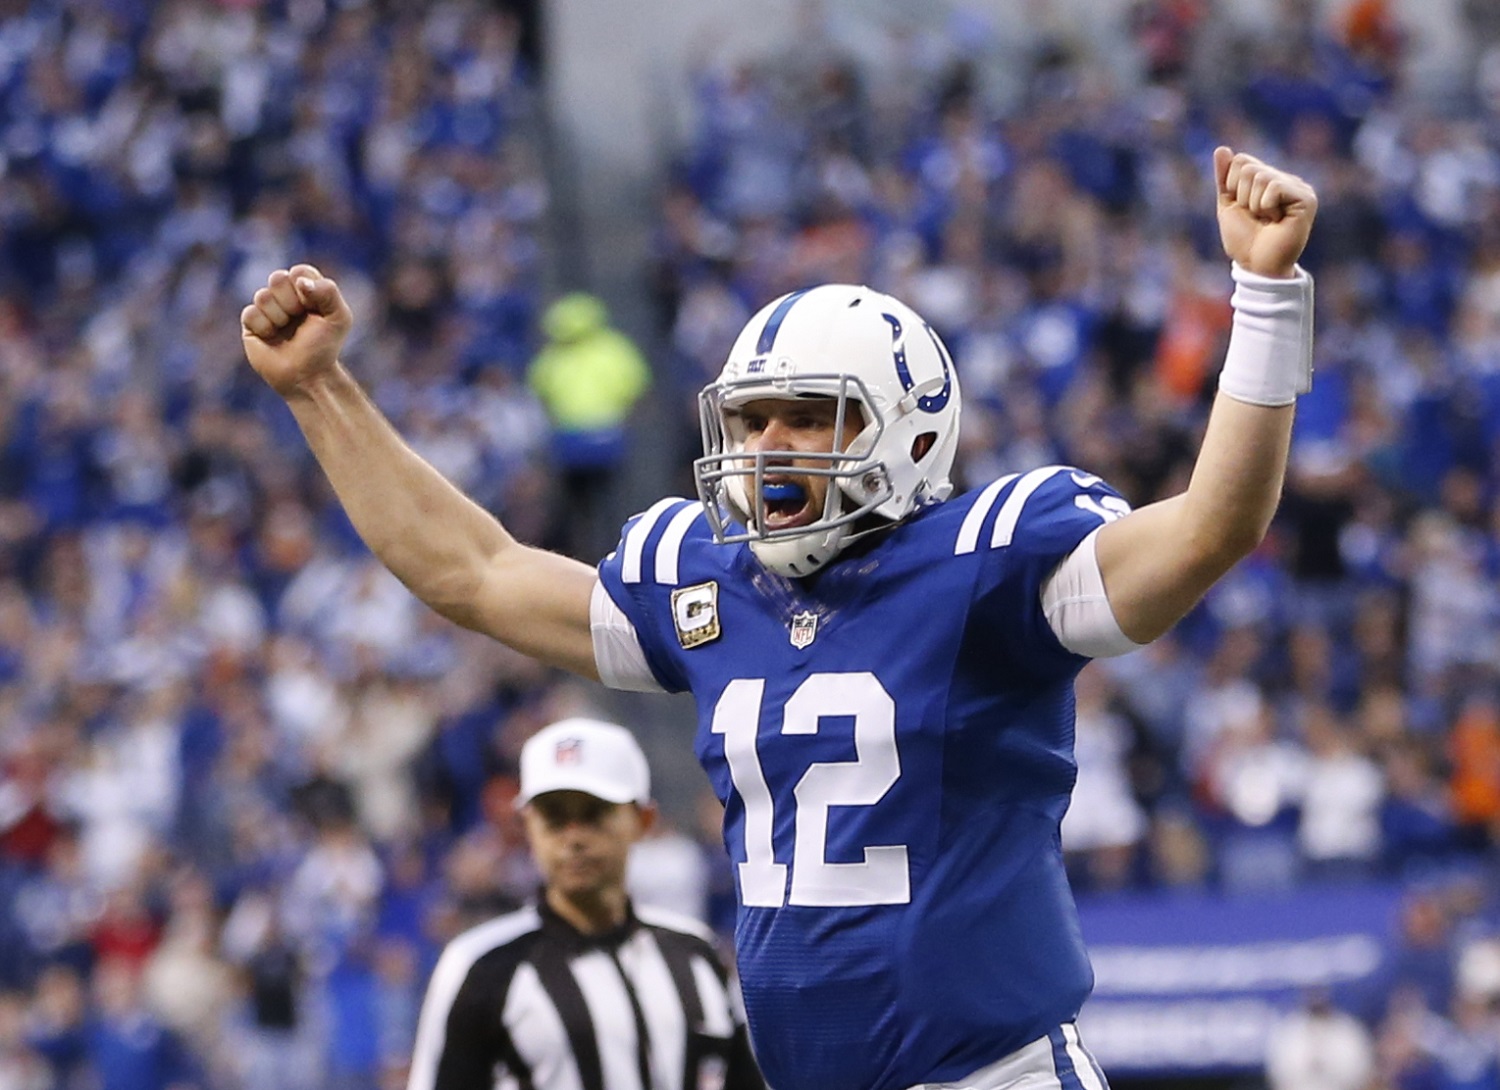 Indianapolis Colts quarterback Andrew Luck celebrates after Jack Doyle scored on a three yard touchdown reception during the first half of an NFL football game against the Denver Broncos, Sunday, Nov. 8, 2015, Indianapolis. (AP Photo/AJ Mast)